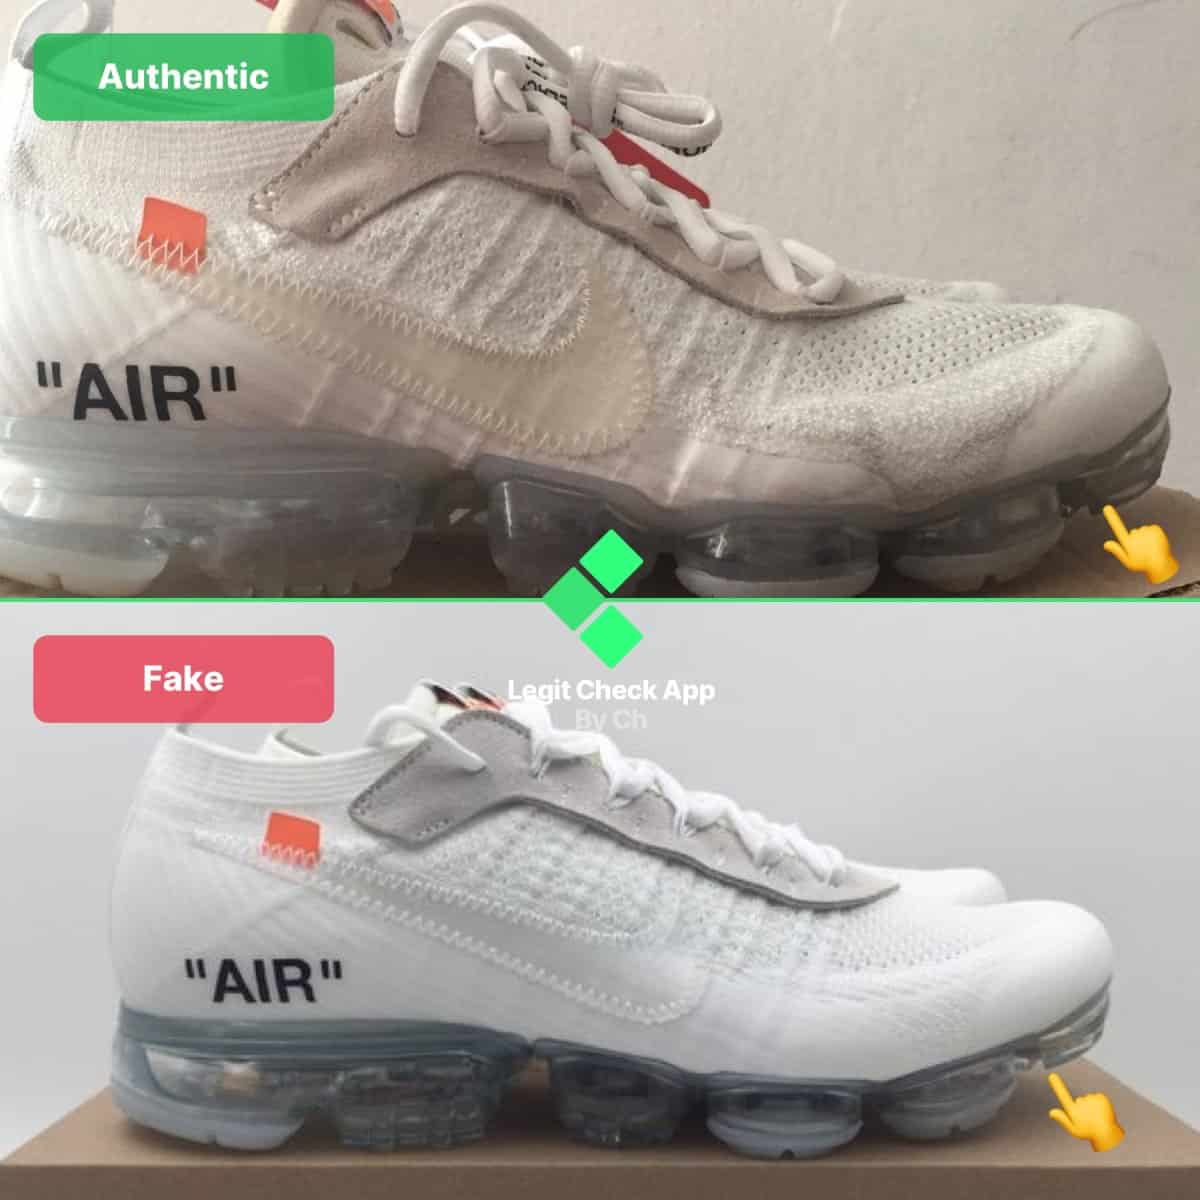 How To Spot Fake Off-White Vapormax White - Legit Check By Ch